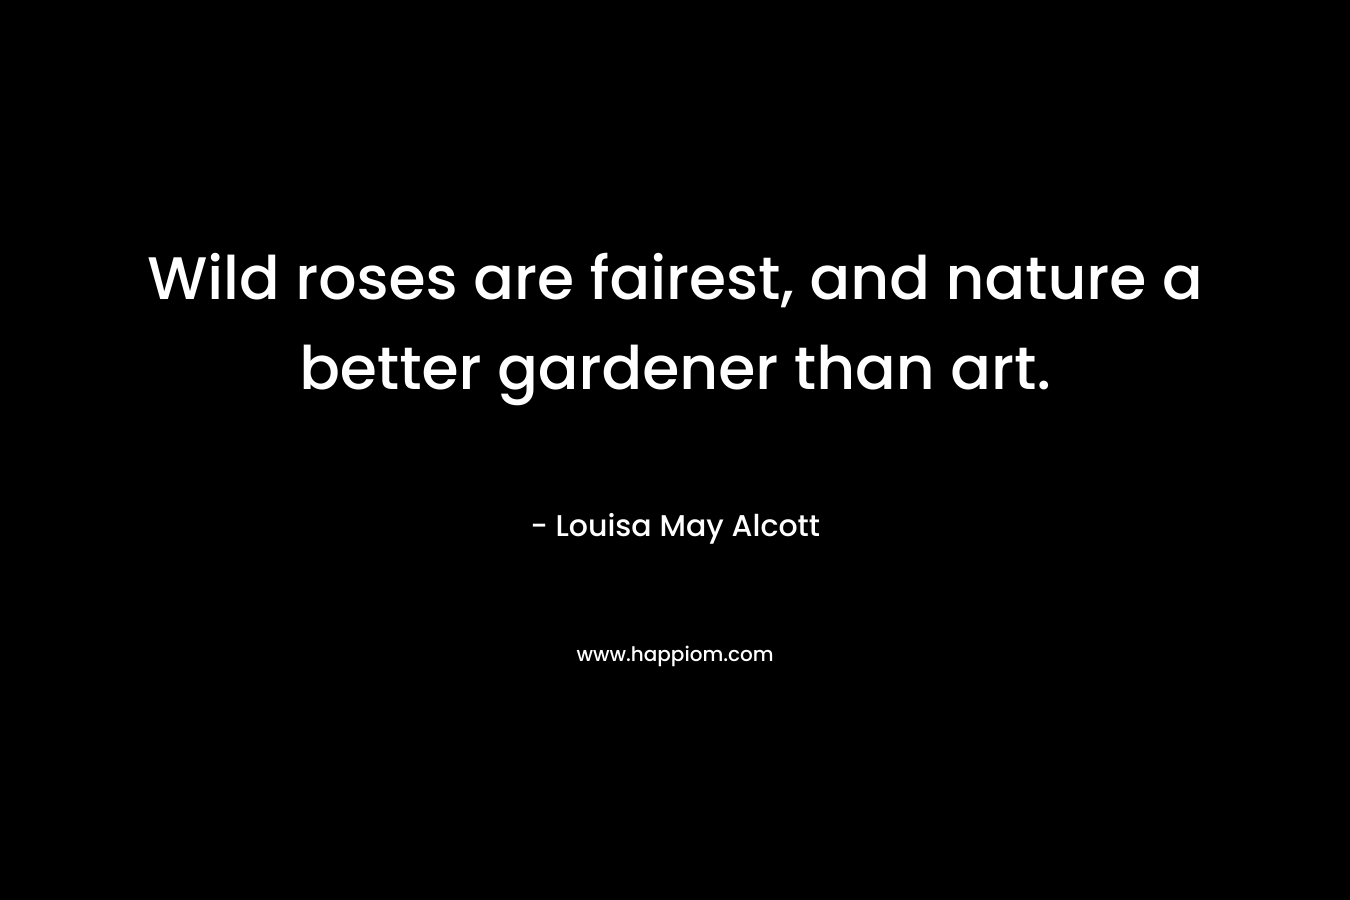 Wild roses are fairest, and nature a better gardener than art.